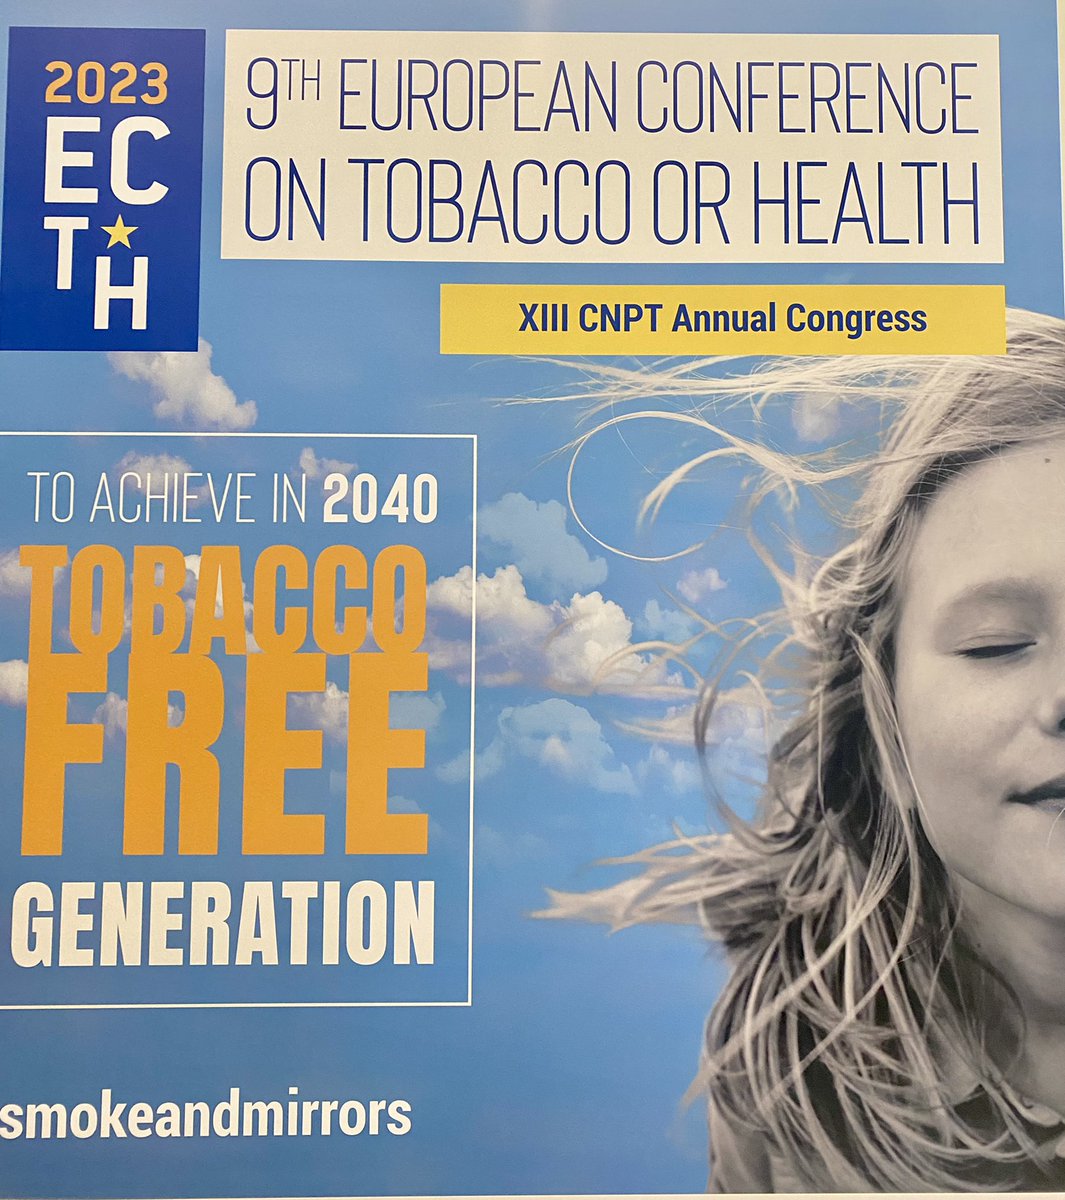 Looking forward to presenting tomorrow at @ECToH on youth use of #menthol accessories in England- implications for #healthequity Thurs 27 Apr, 12:30-13:30 in Annex Hall 3 #ECToH2023 @ITCProject